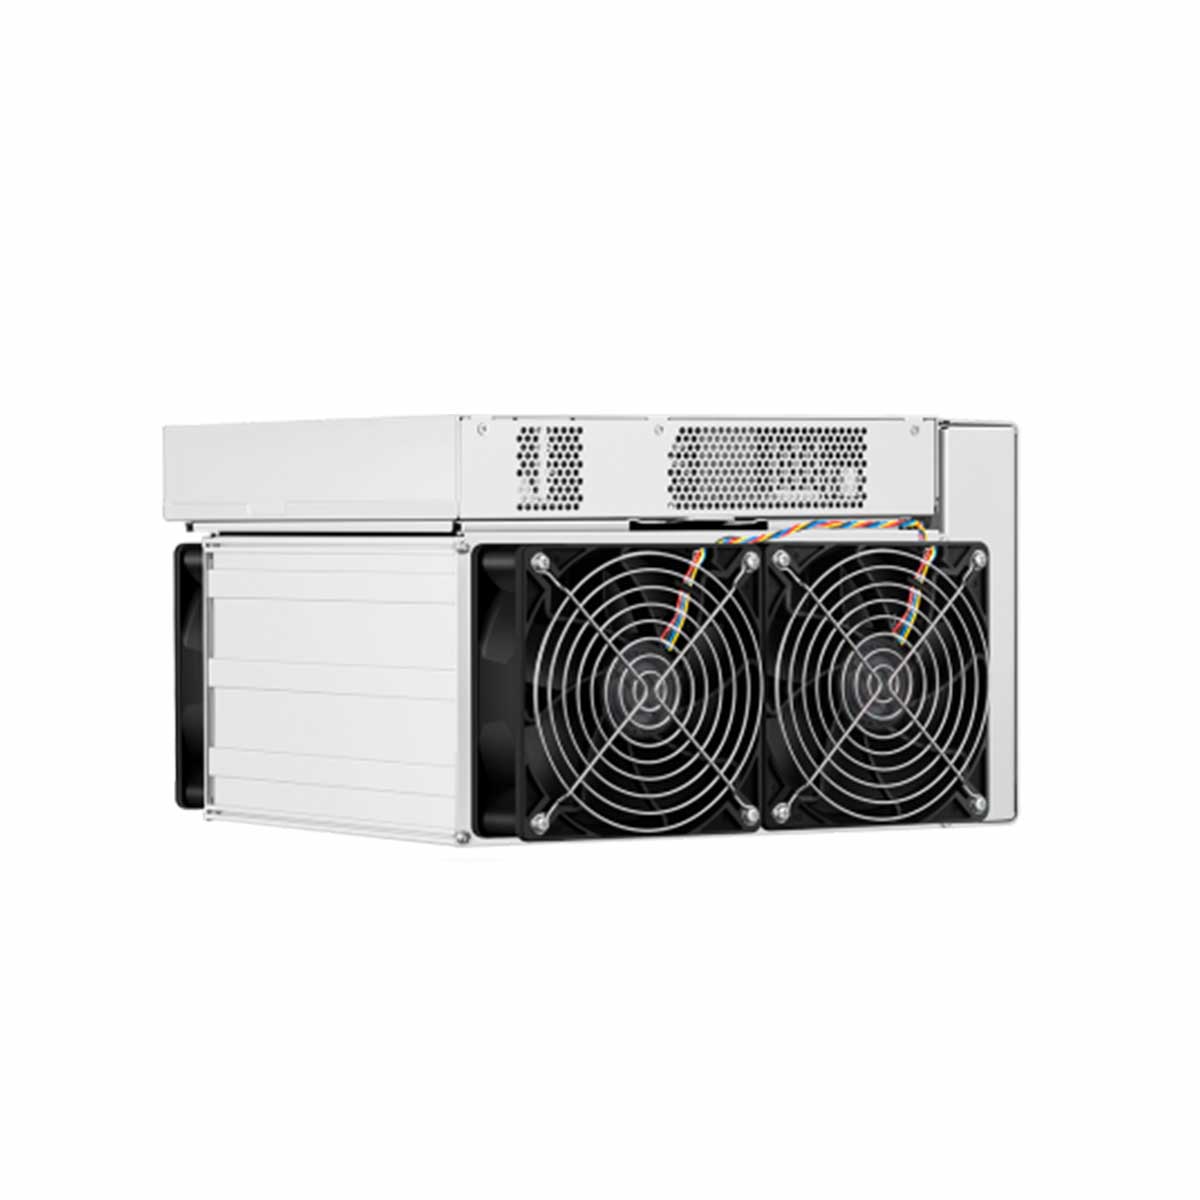 Antminer t21 190 th s. Antminer s17 Pro. ASIC Antminer s17 Pro. Antminer s17 Pro 50 th/s. Bitmain Antminer s17 Pro 53th/s.